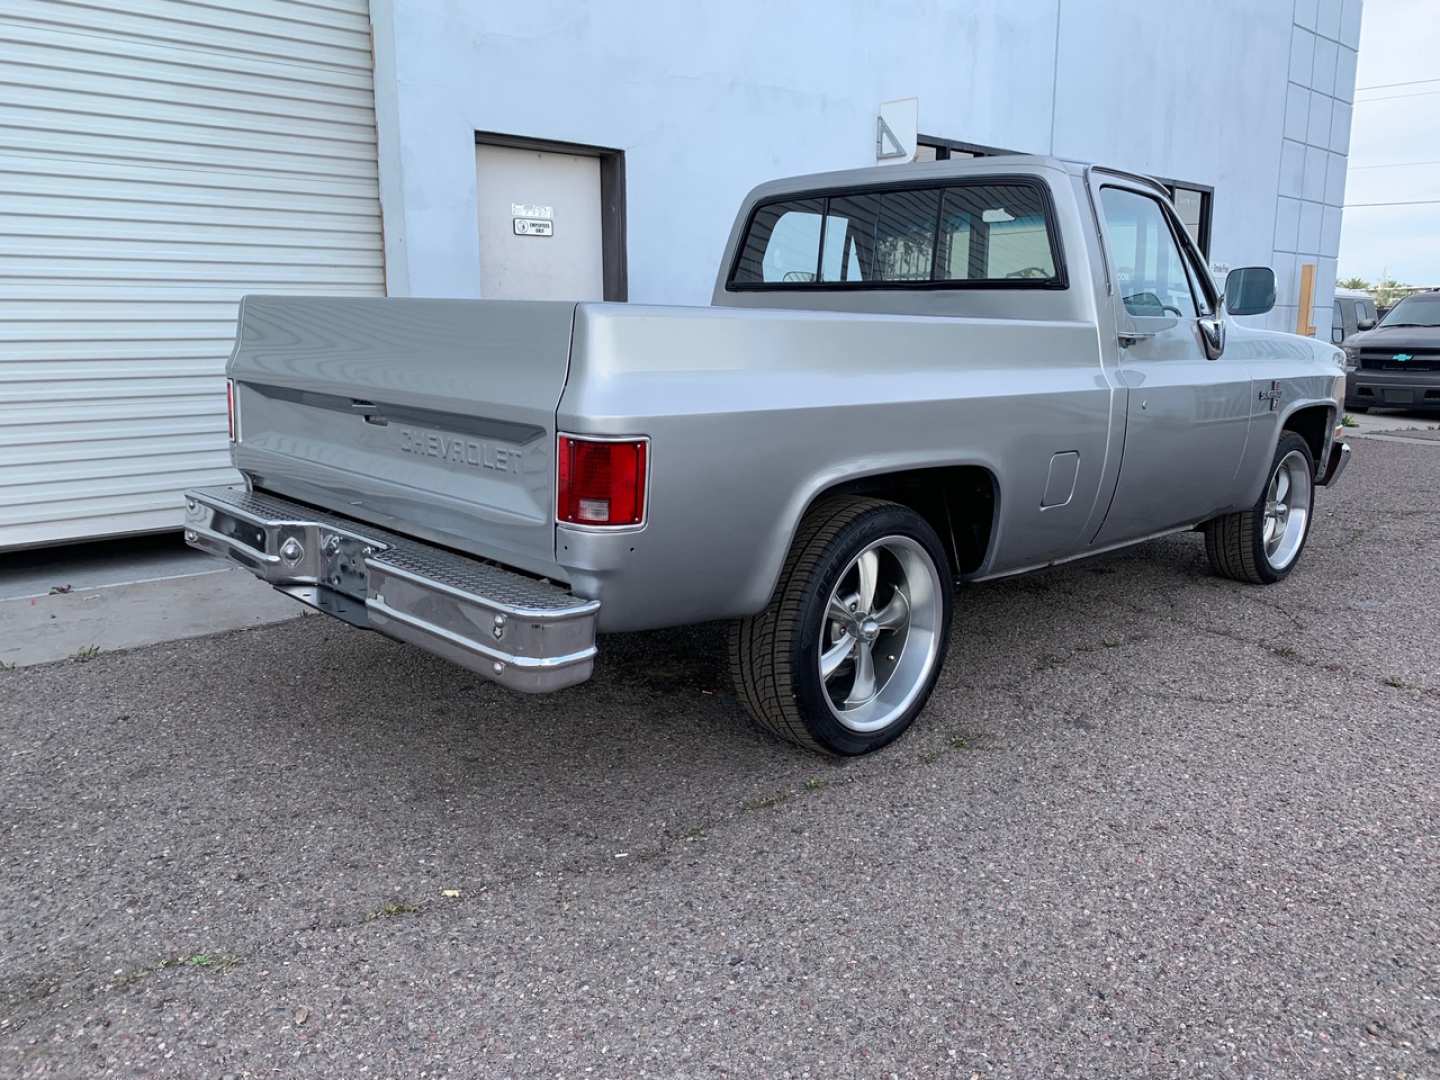 3rd Image of a 1981 GMC C1500